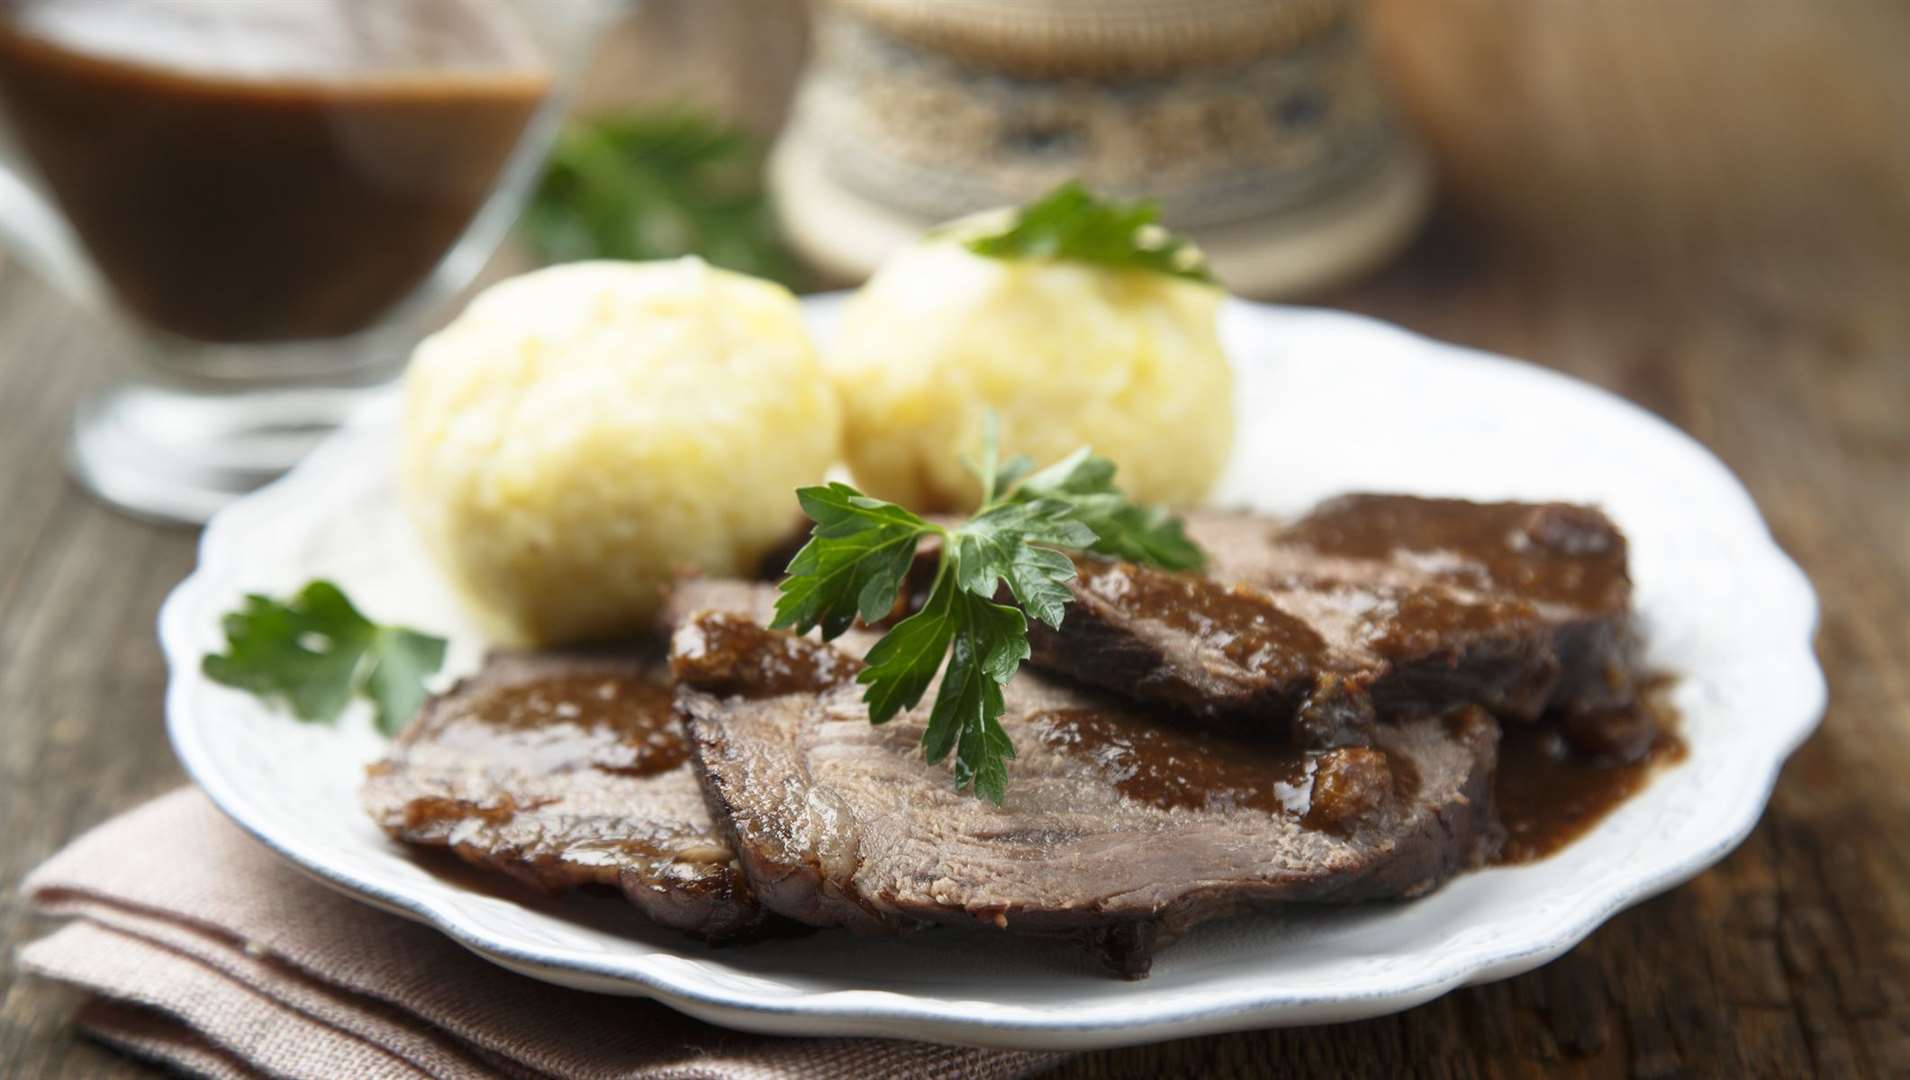 Sauerbraten is a traditional roast of heavily marinated meat and is regarded as a national dish of Germany. It's simply a must at Lutter & Wegner.